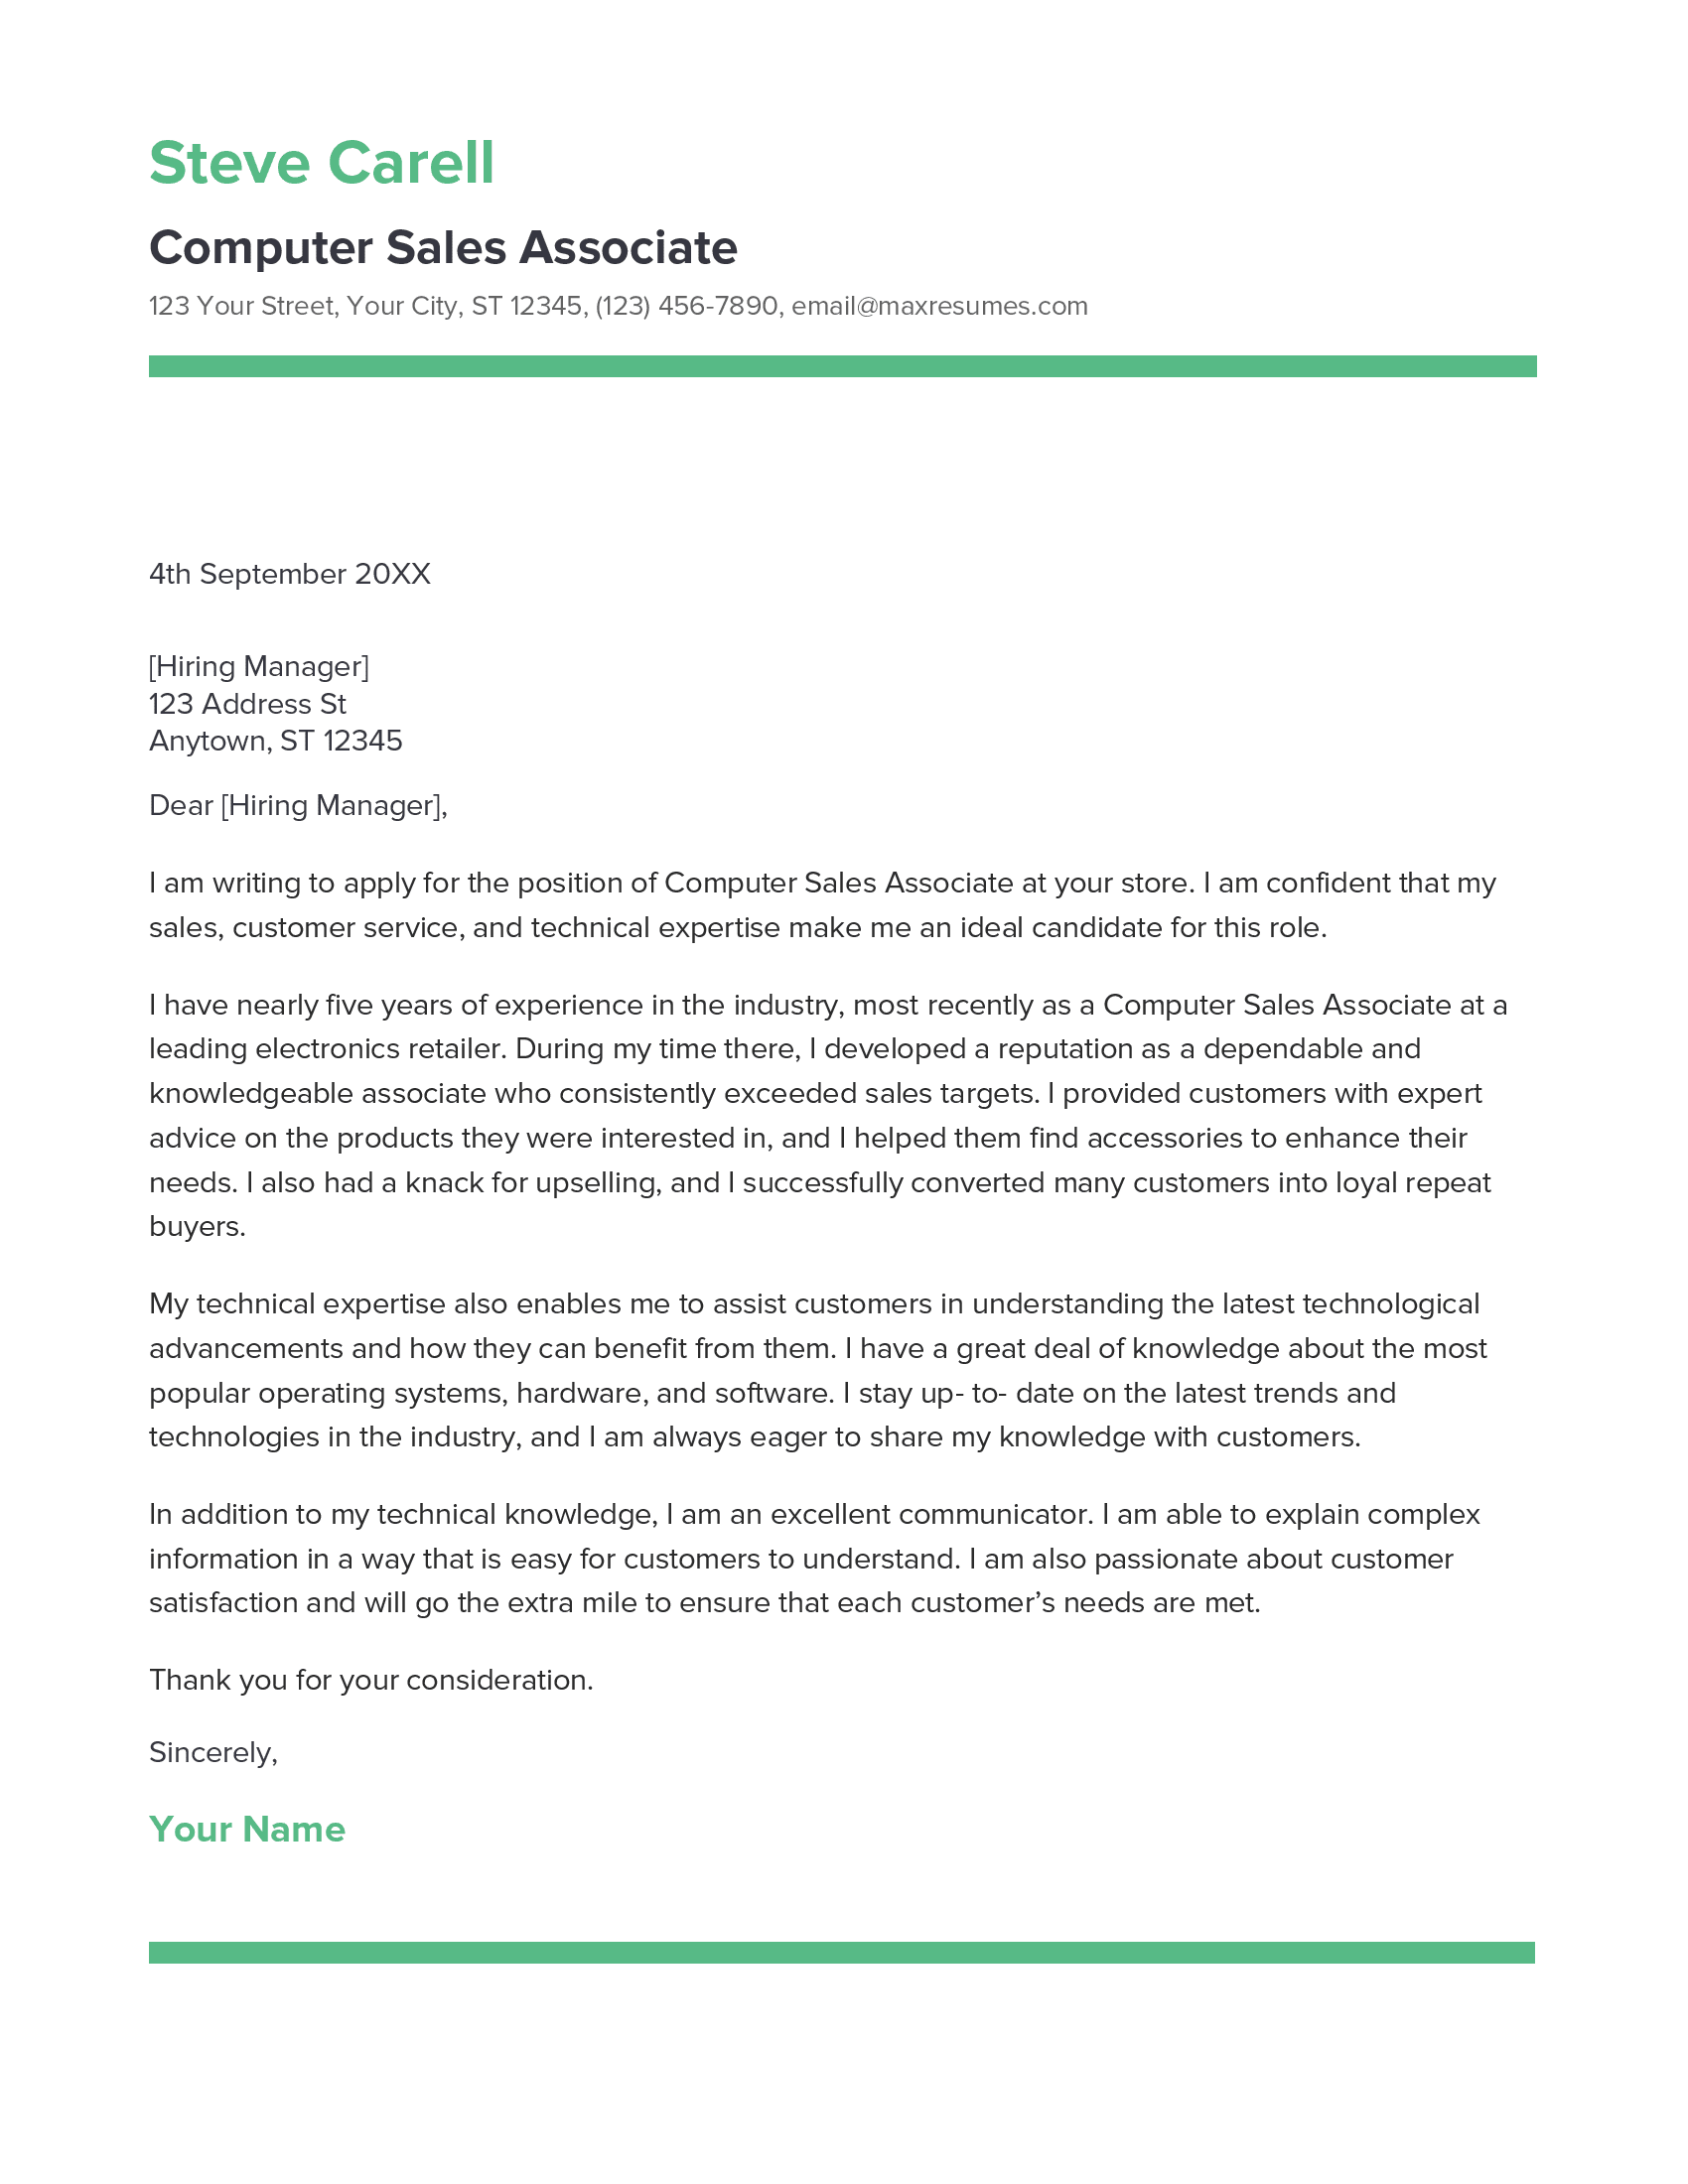 Computer Sales Associate Cover Letter Example